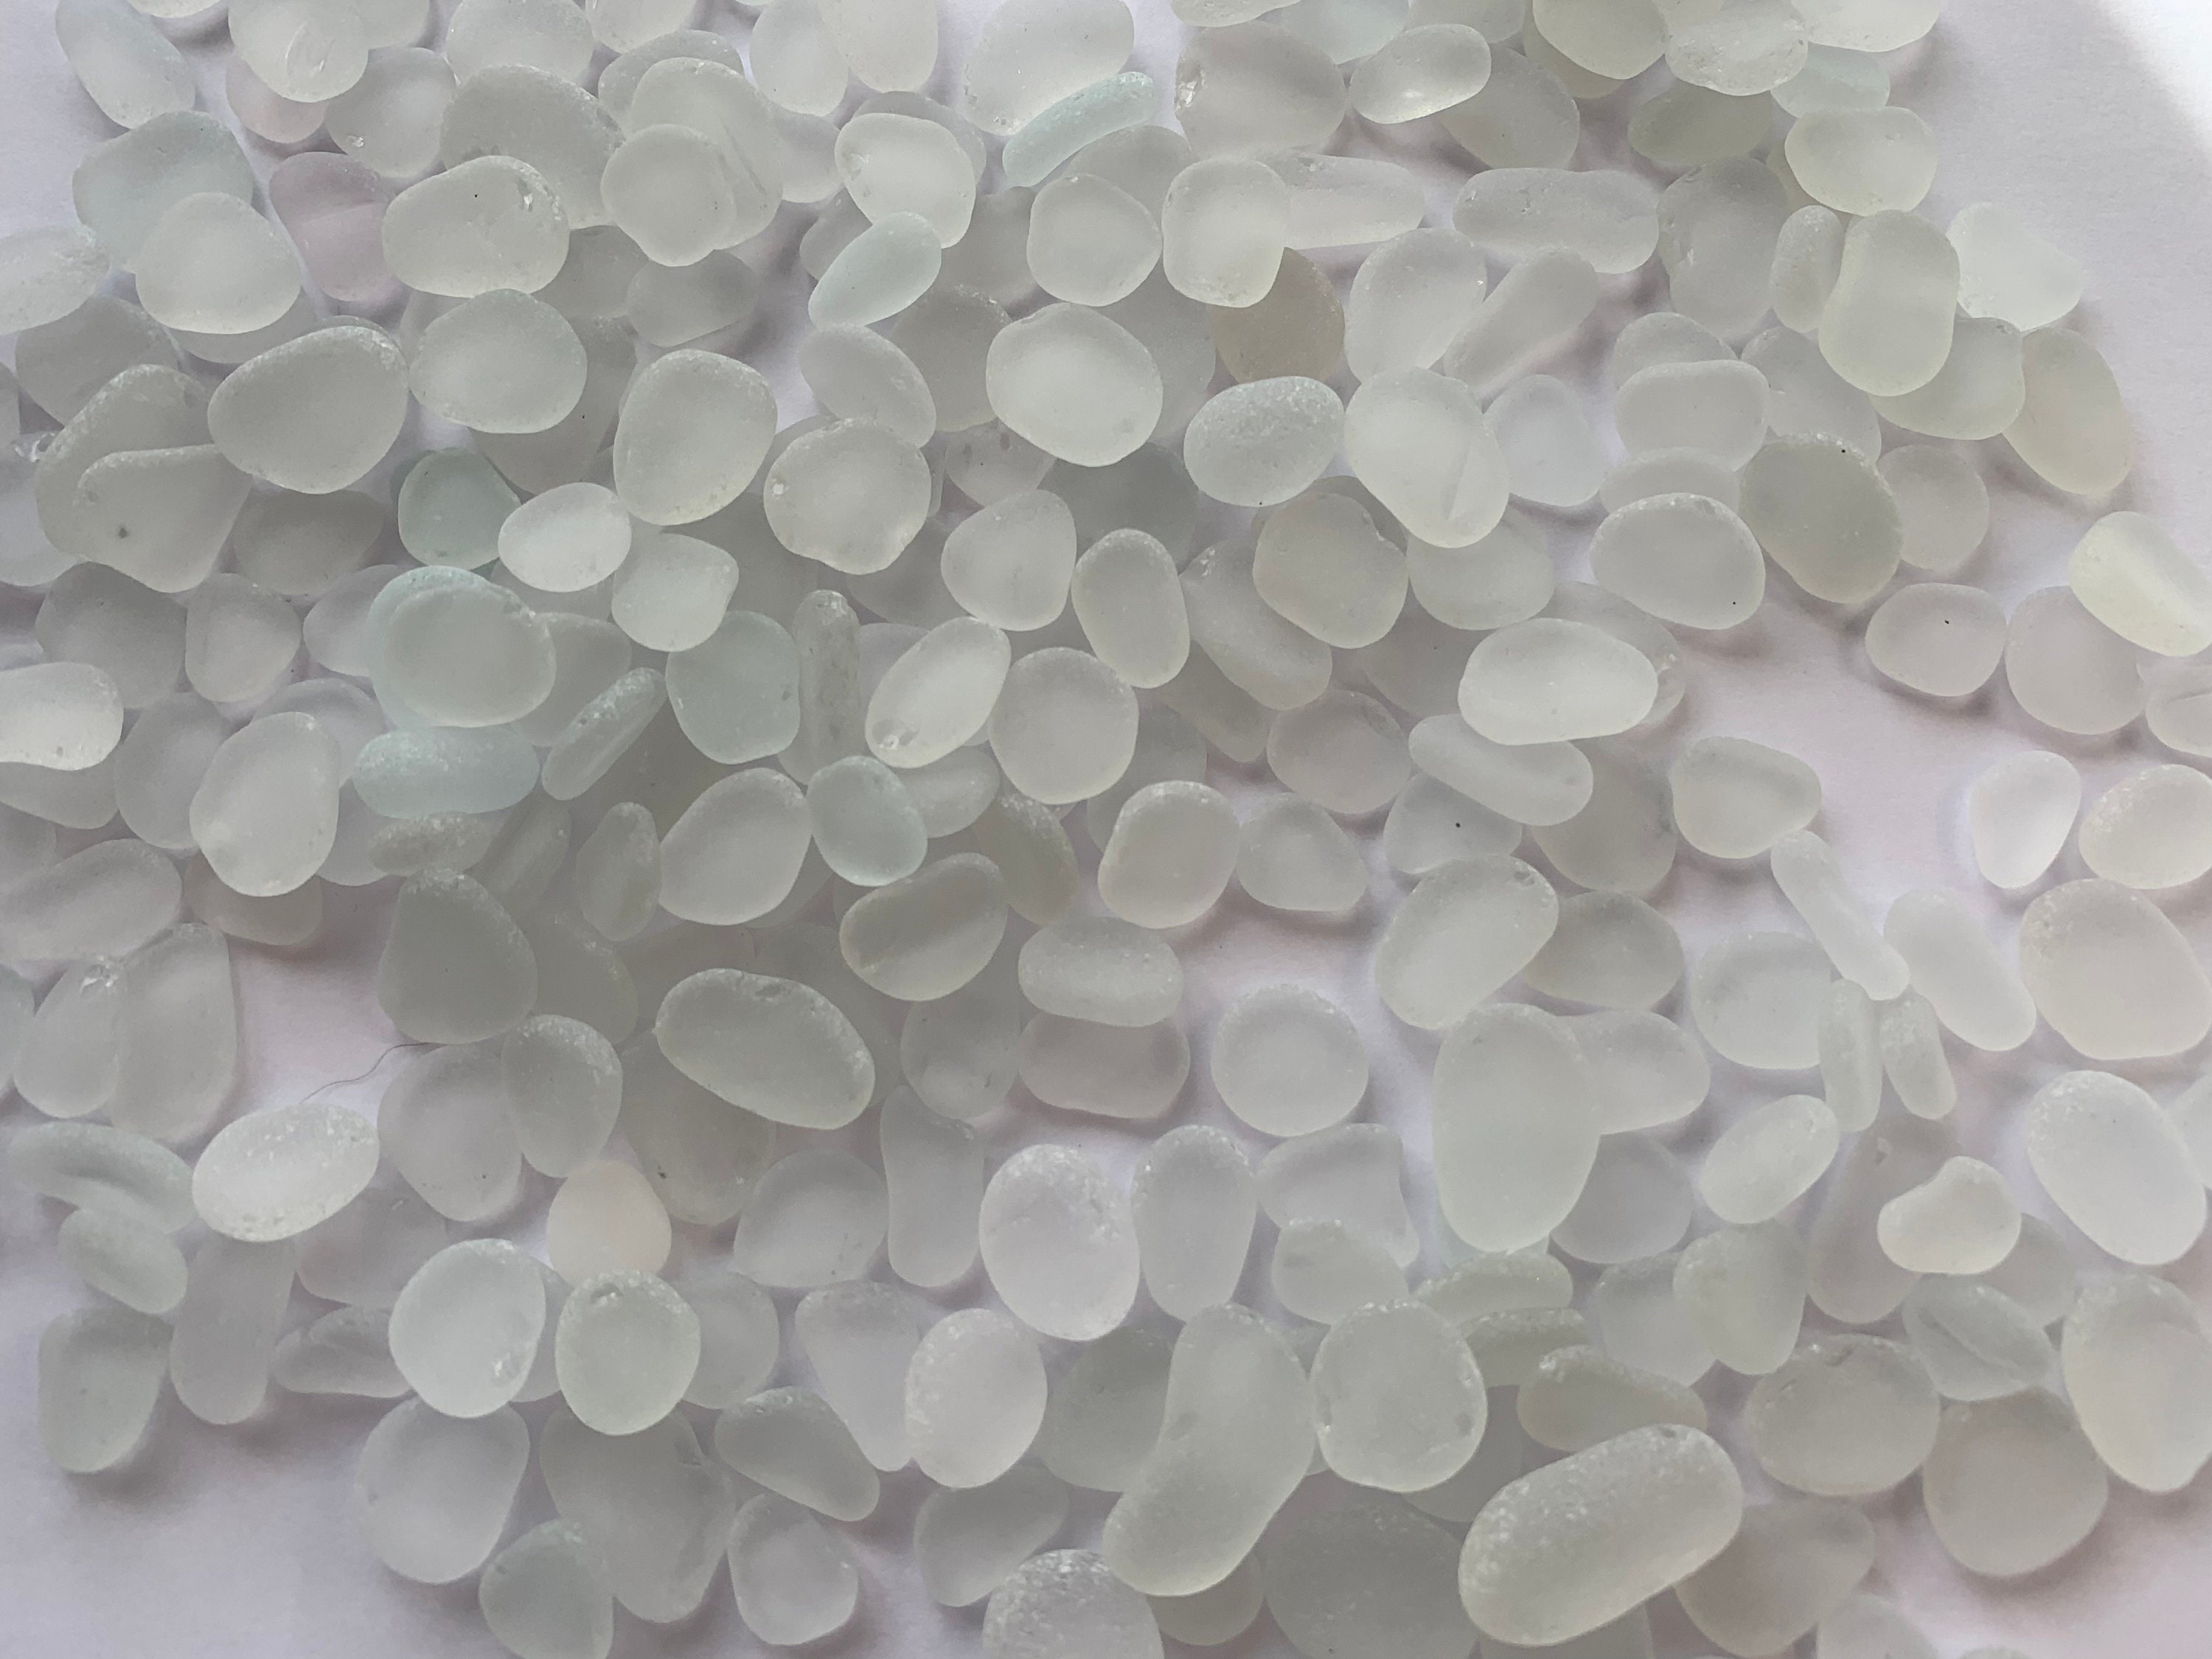 10-15mm Tiny Small Clear White Sea Glass White Clear - Etsy